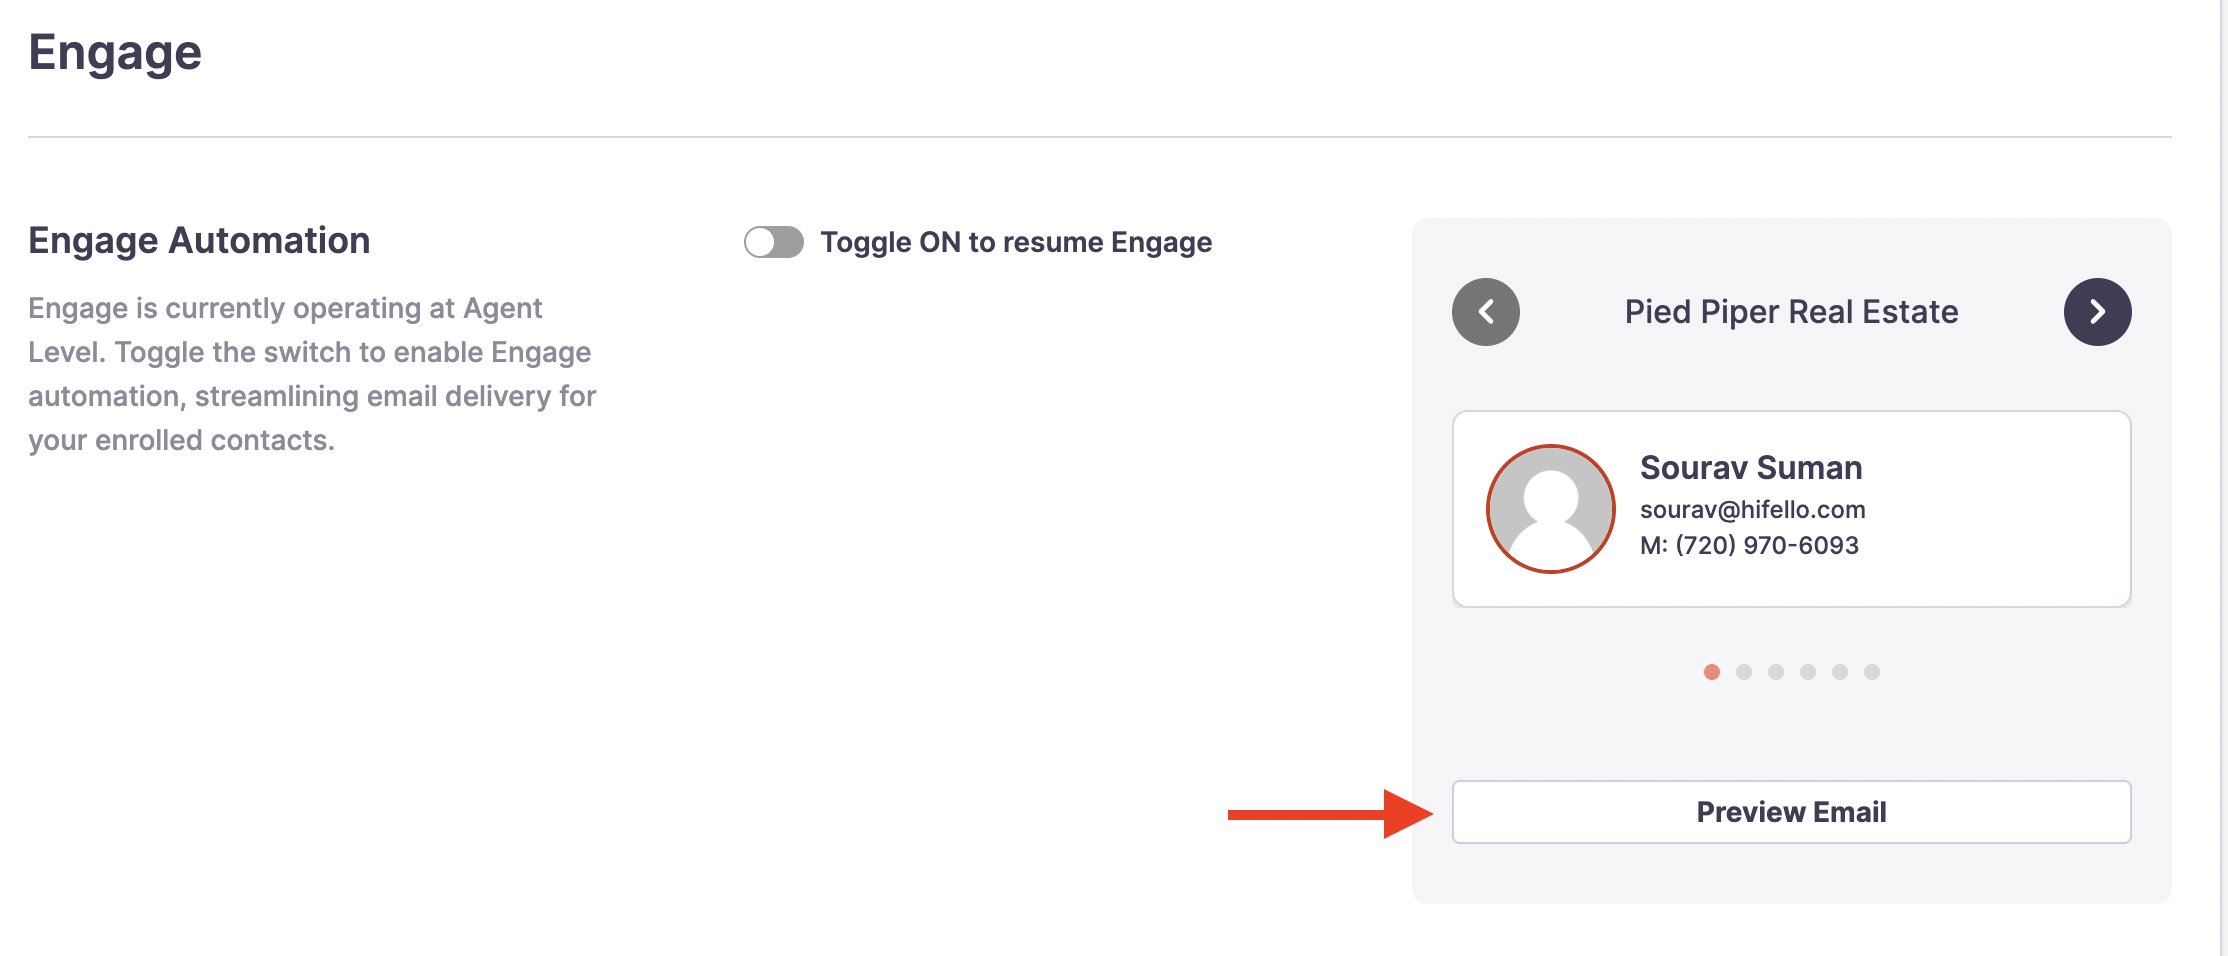 Preview engage email in the engage automation section